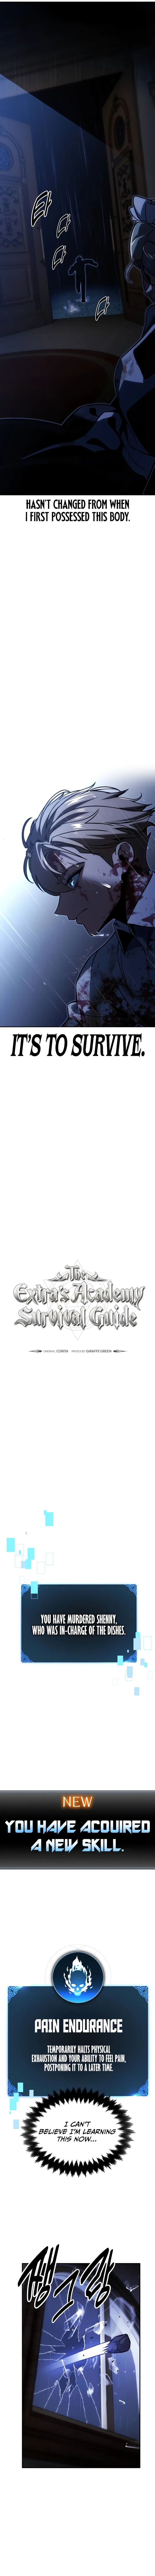 The Extra’s Academy Survival Guide chapter 20